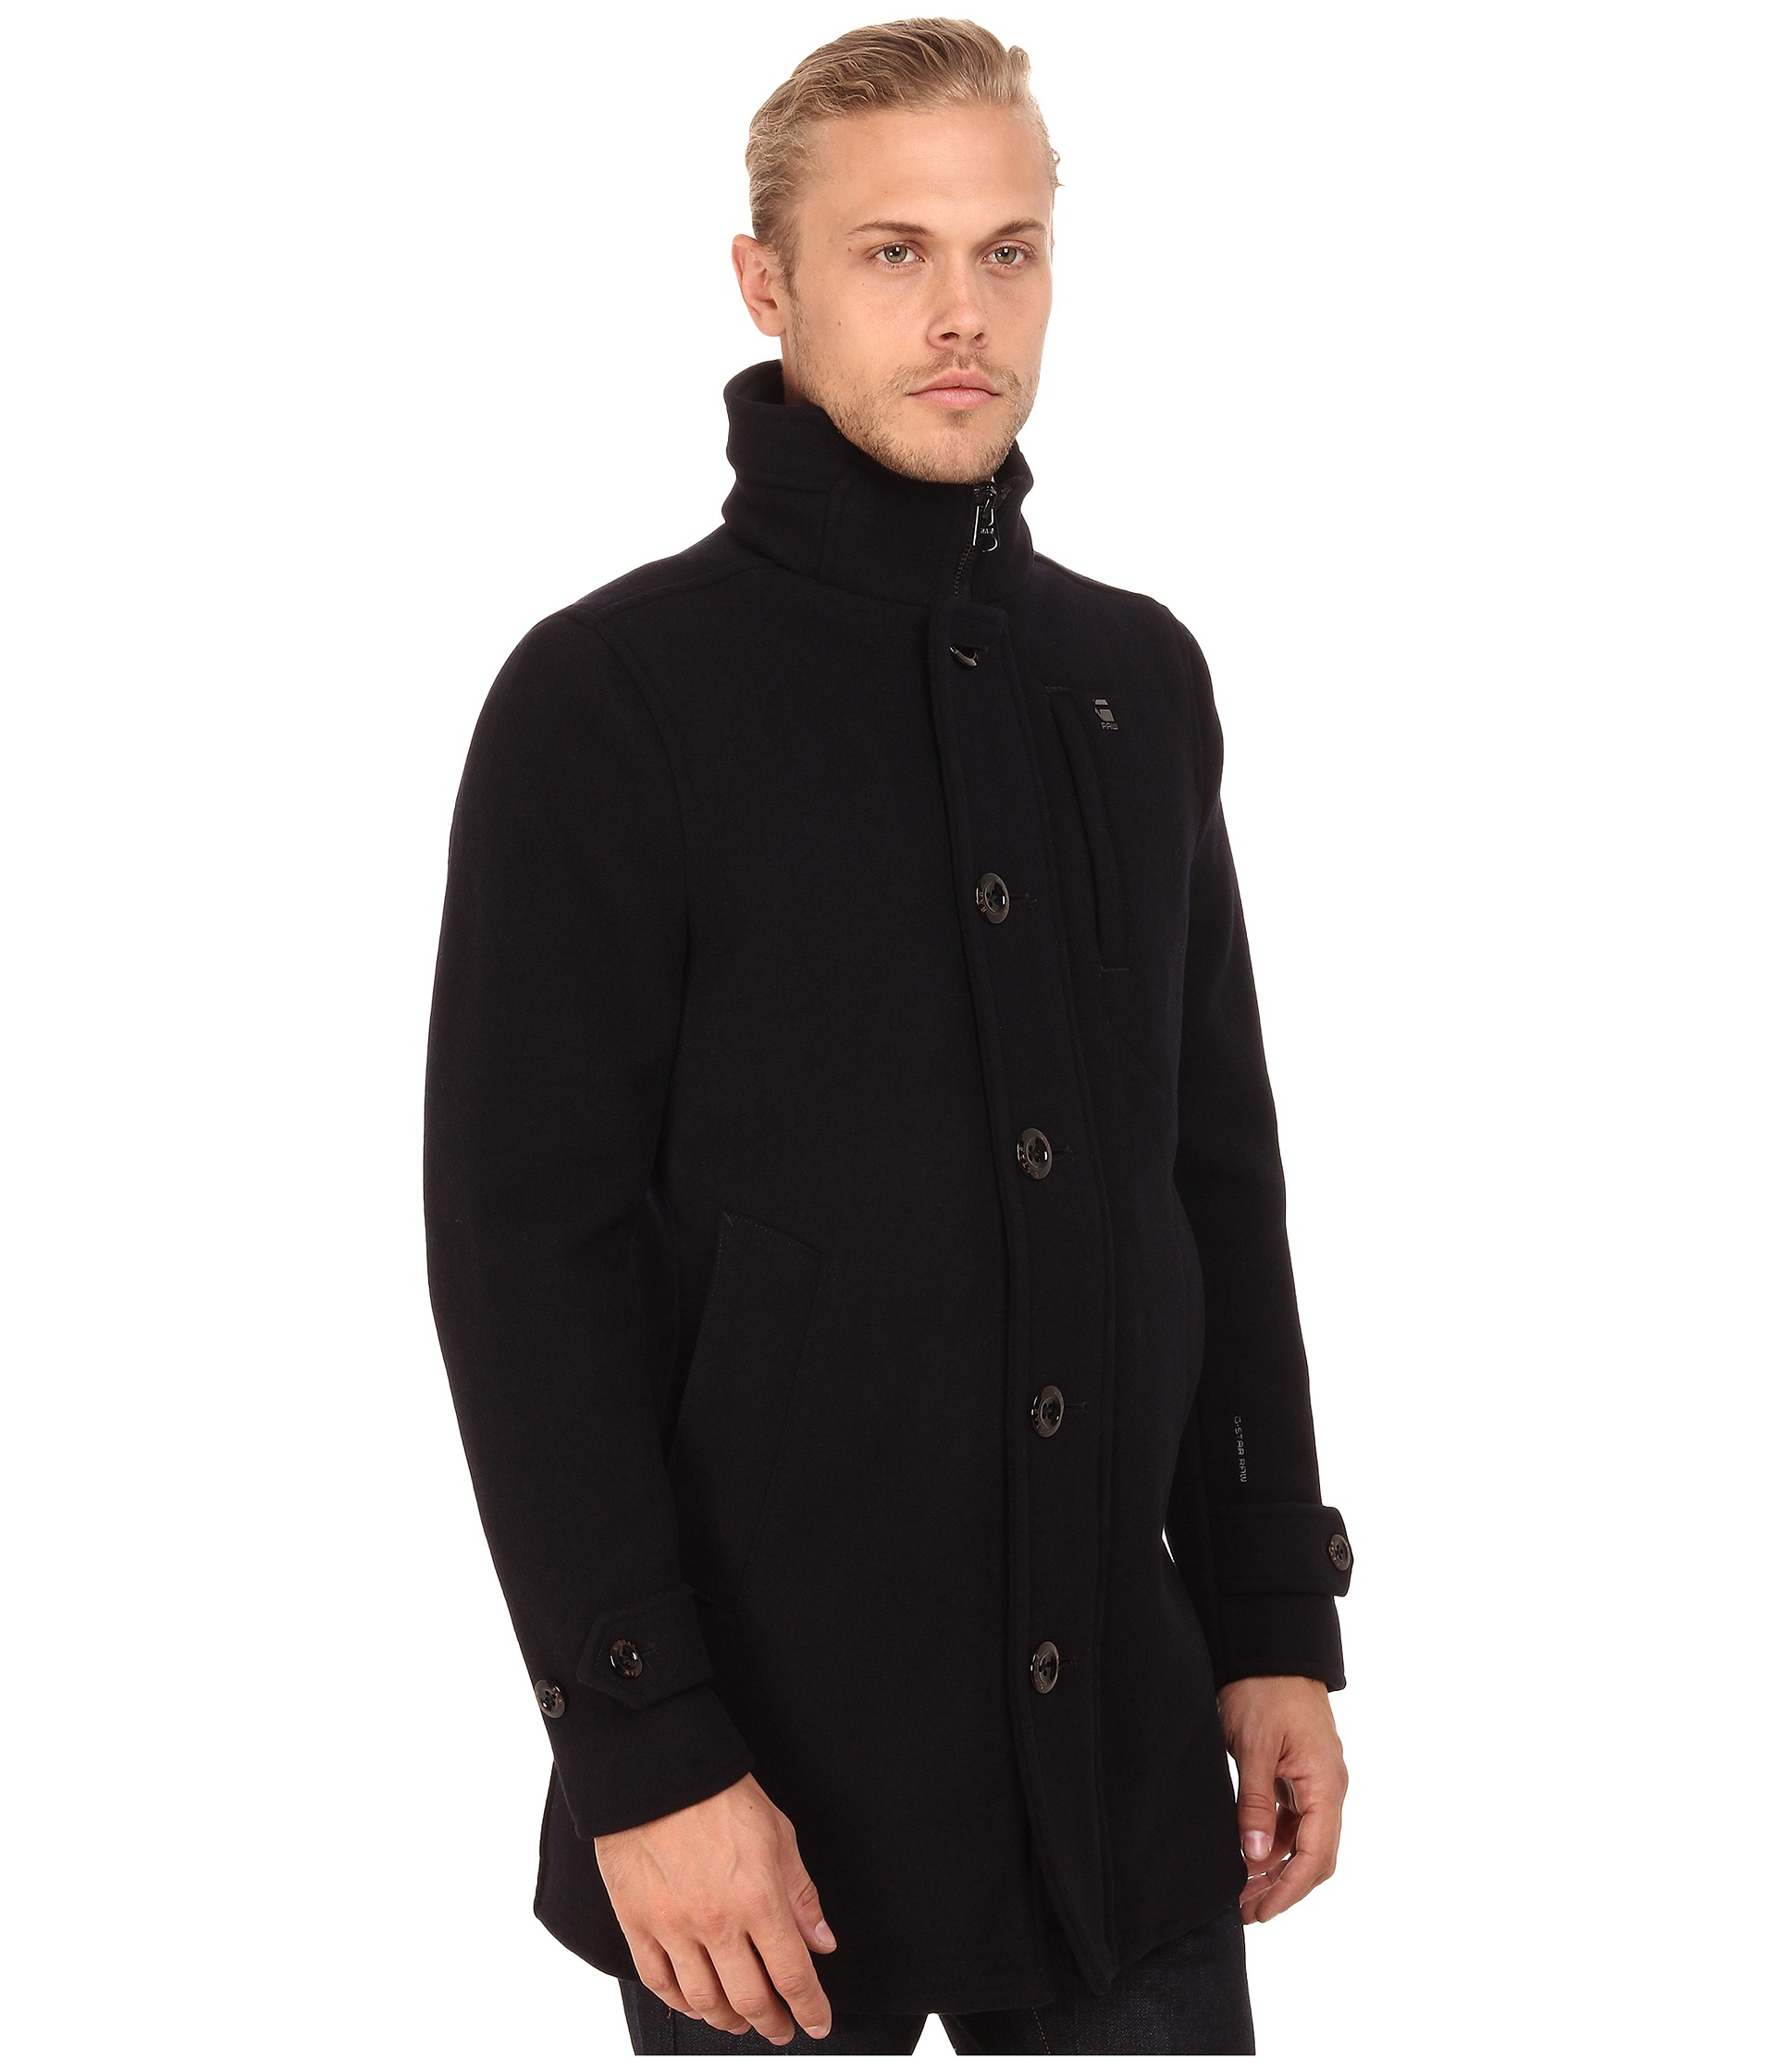 Lyst - G-star raw Wool Garber Trench Coat in Blue for Men